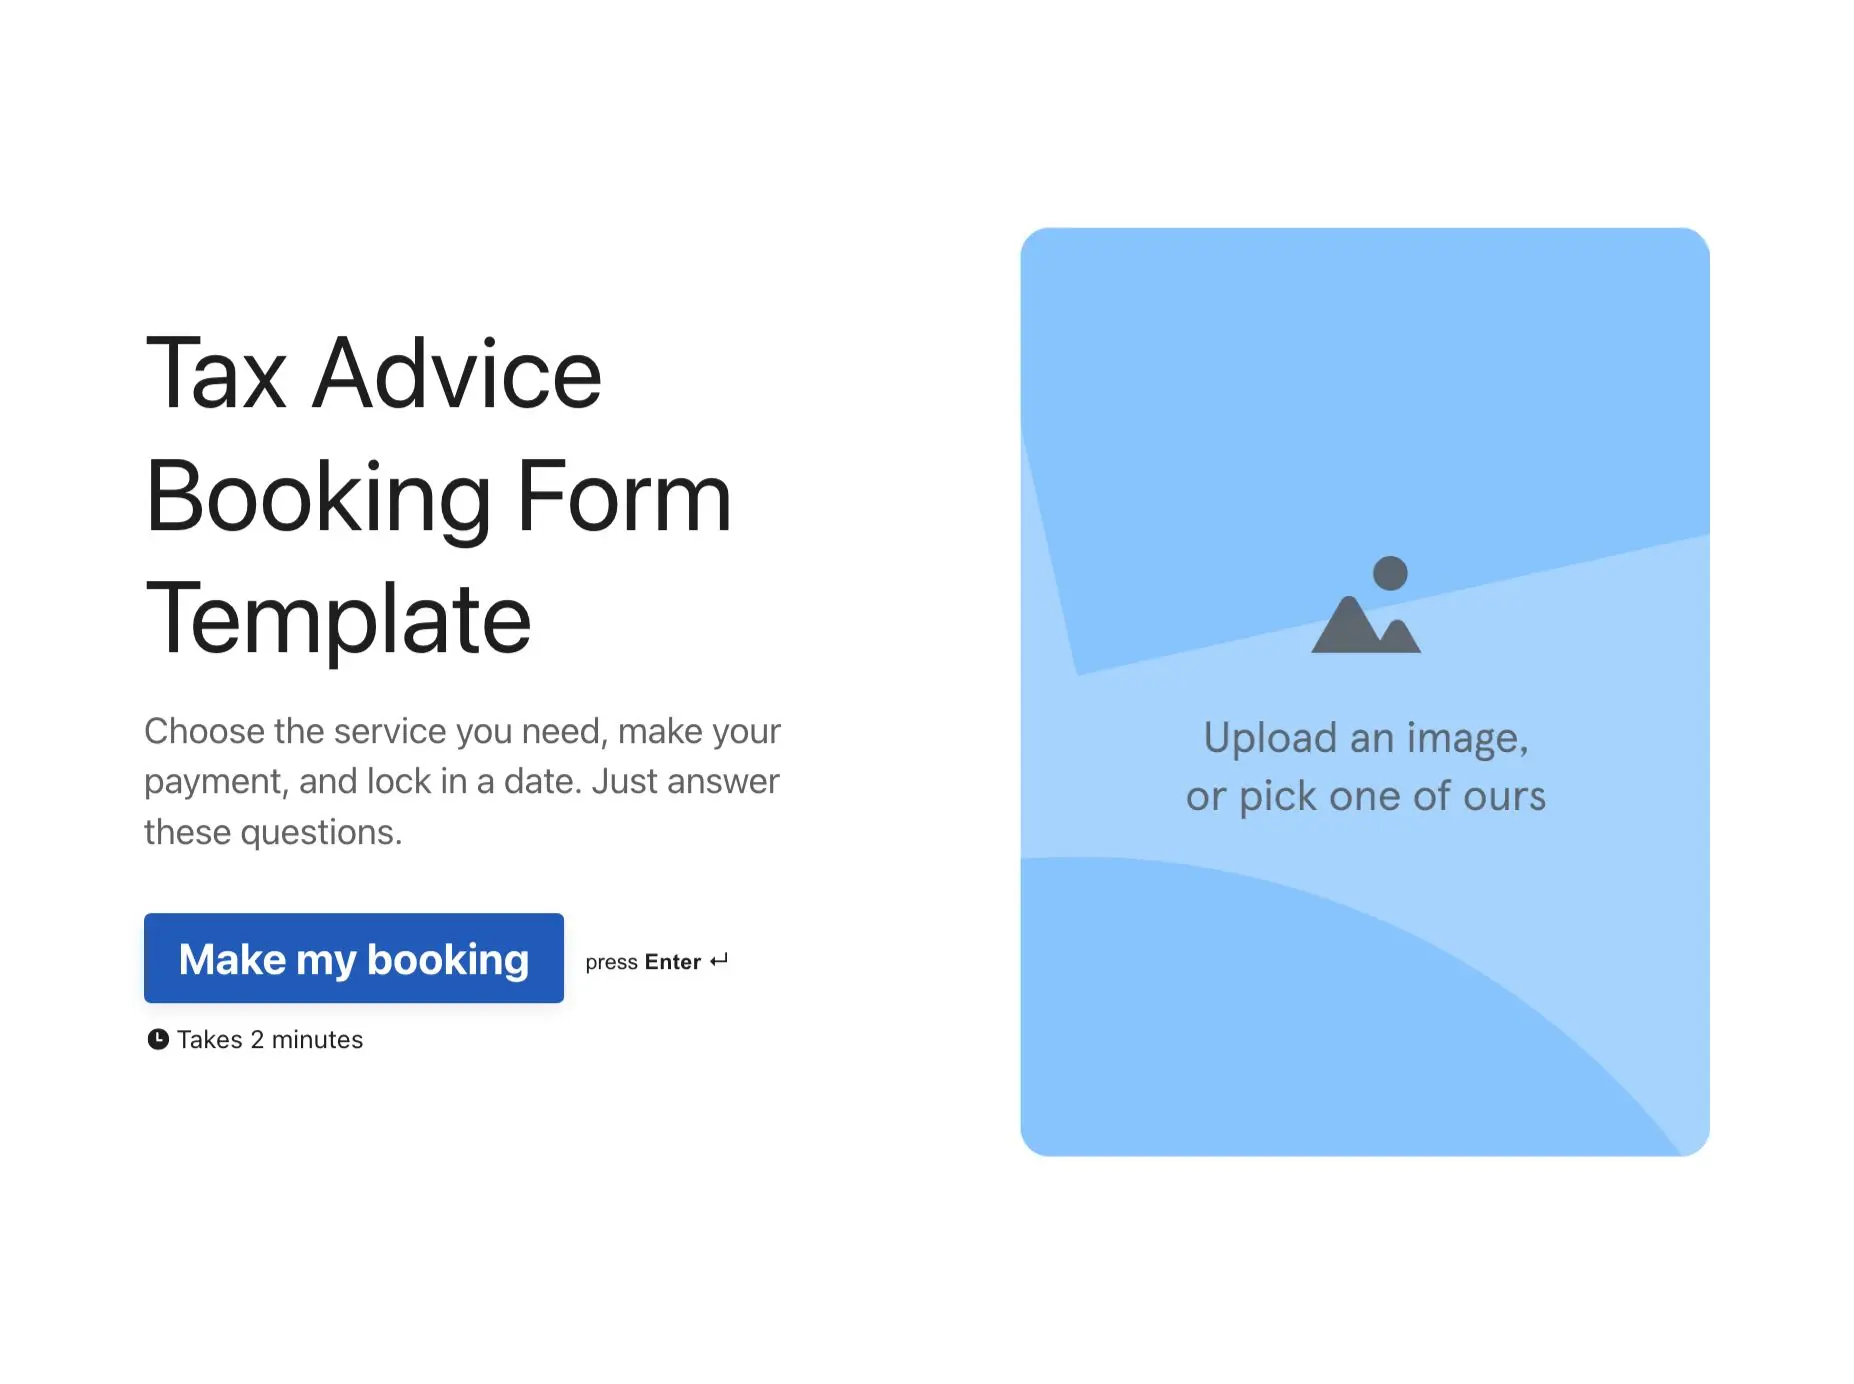 Tax Advice Booking Form Template Hero